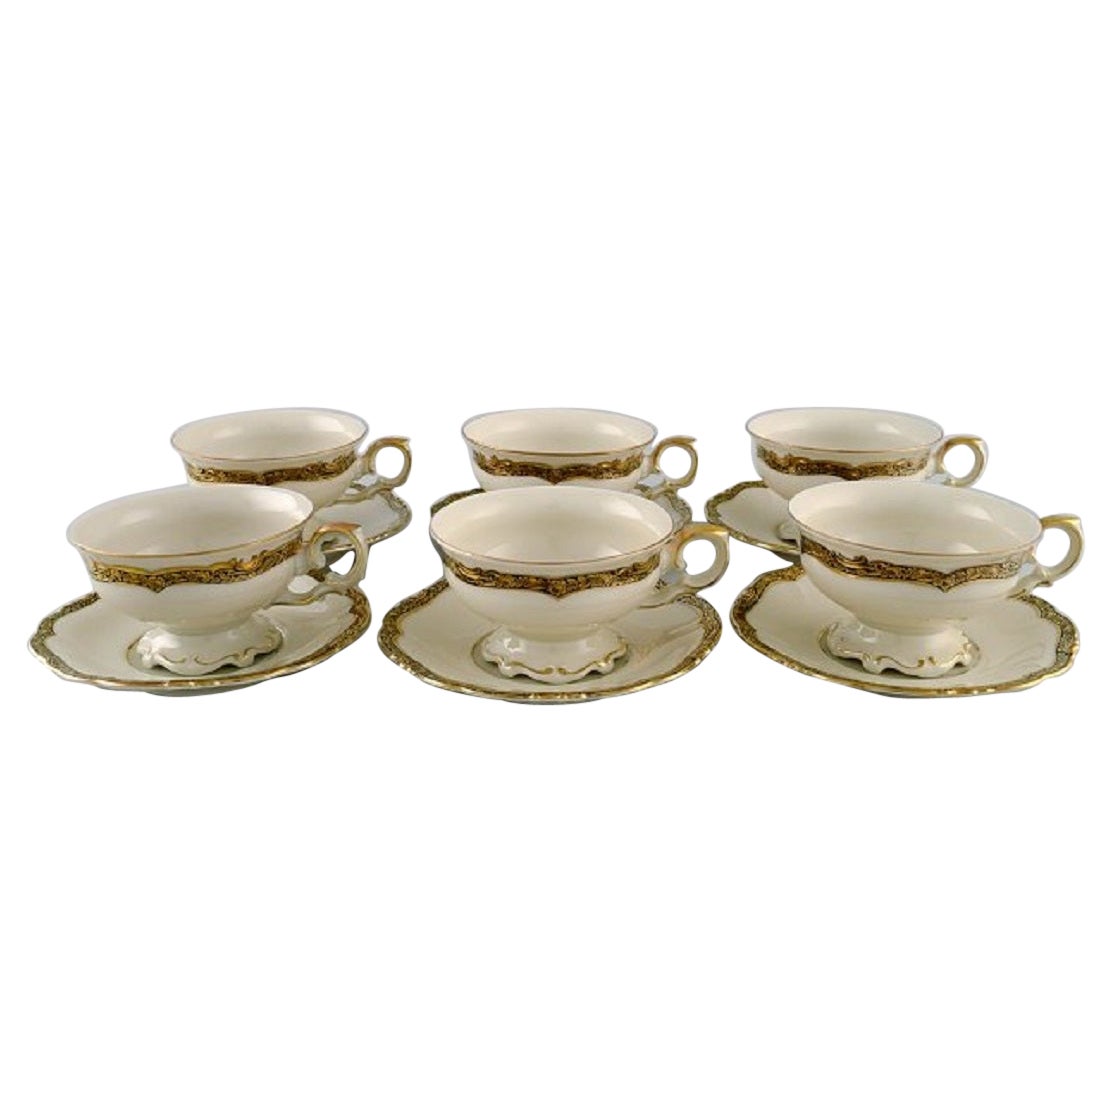 KPM, Berlin, Six Royal Ivory Tea Cups with Saucers in Cream-Colored Porcelain